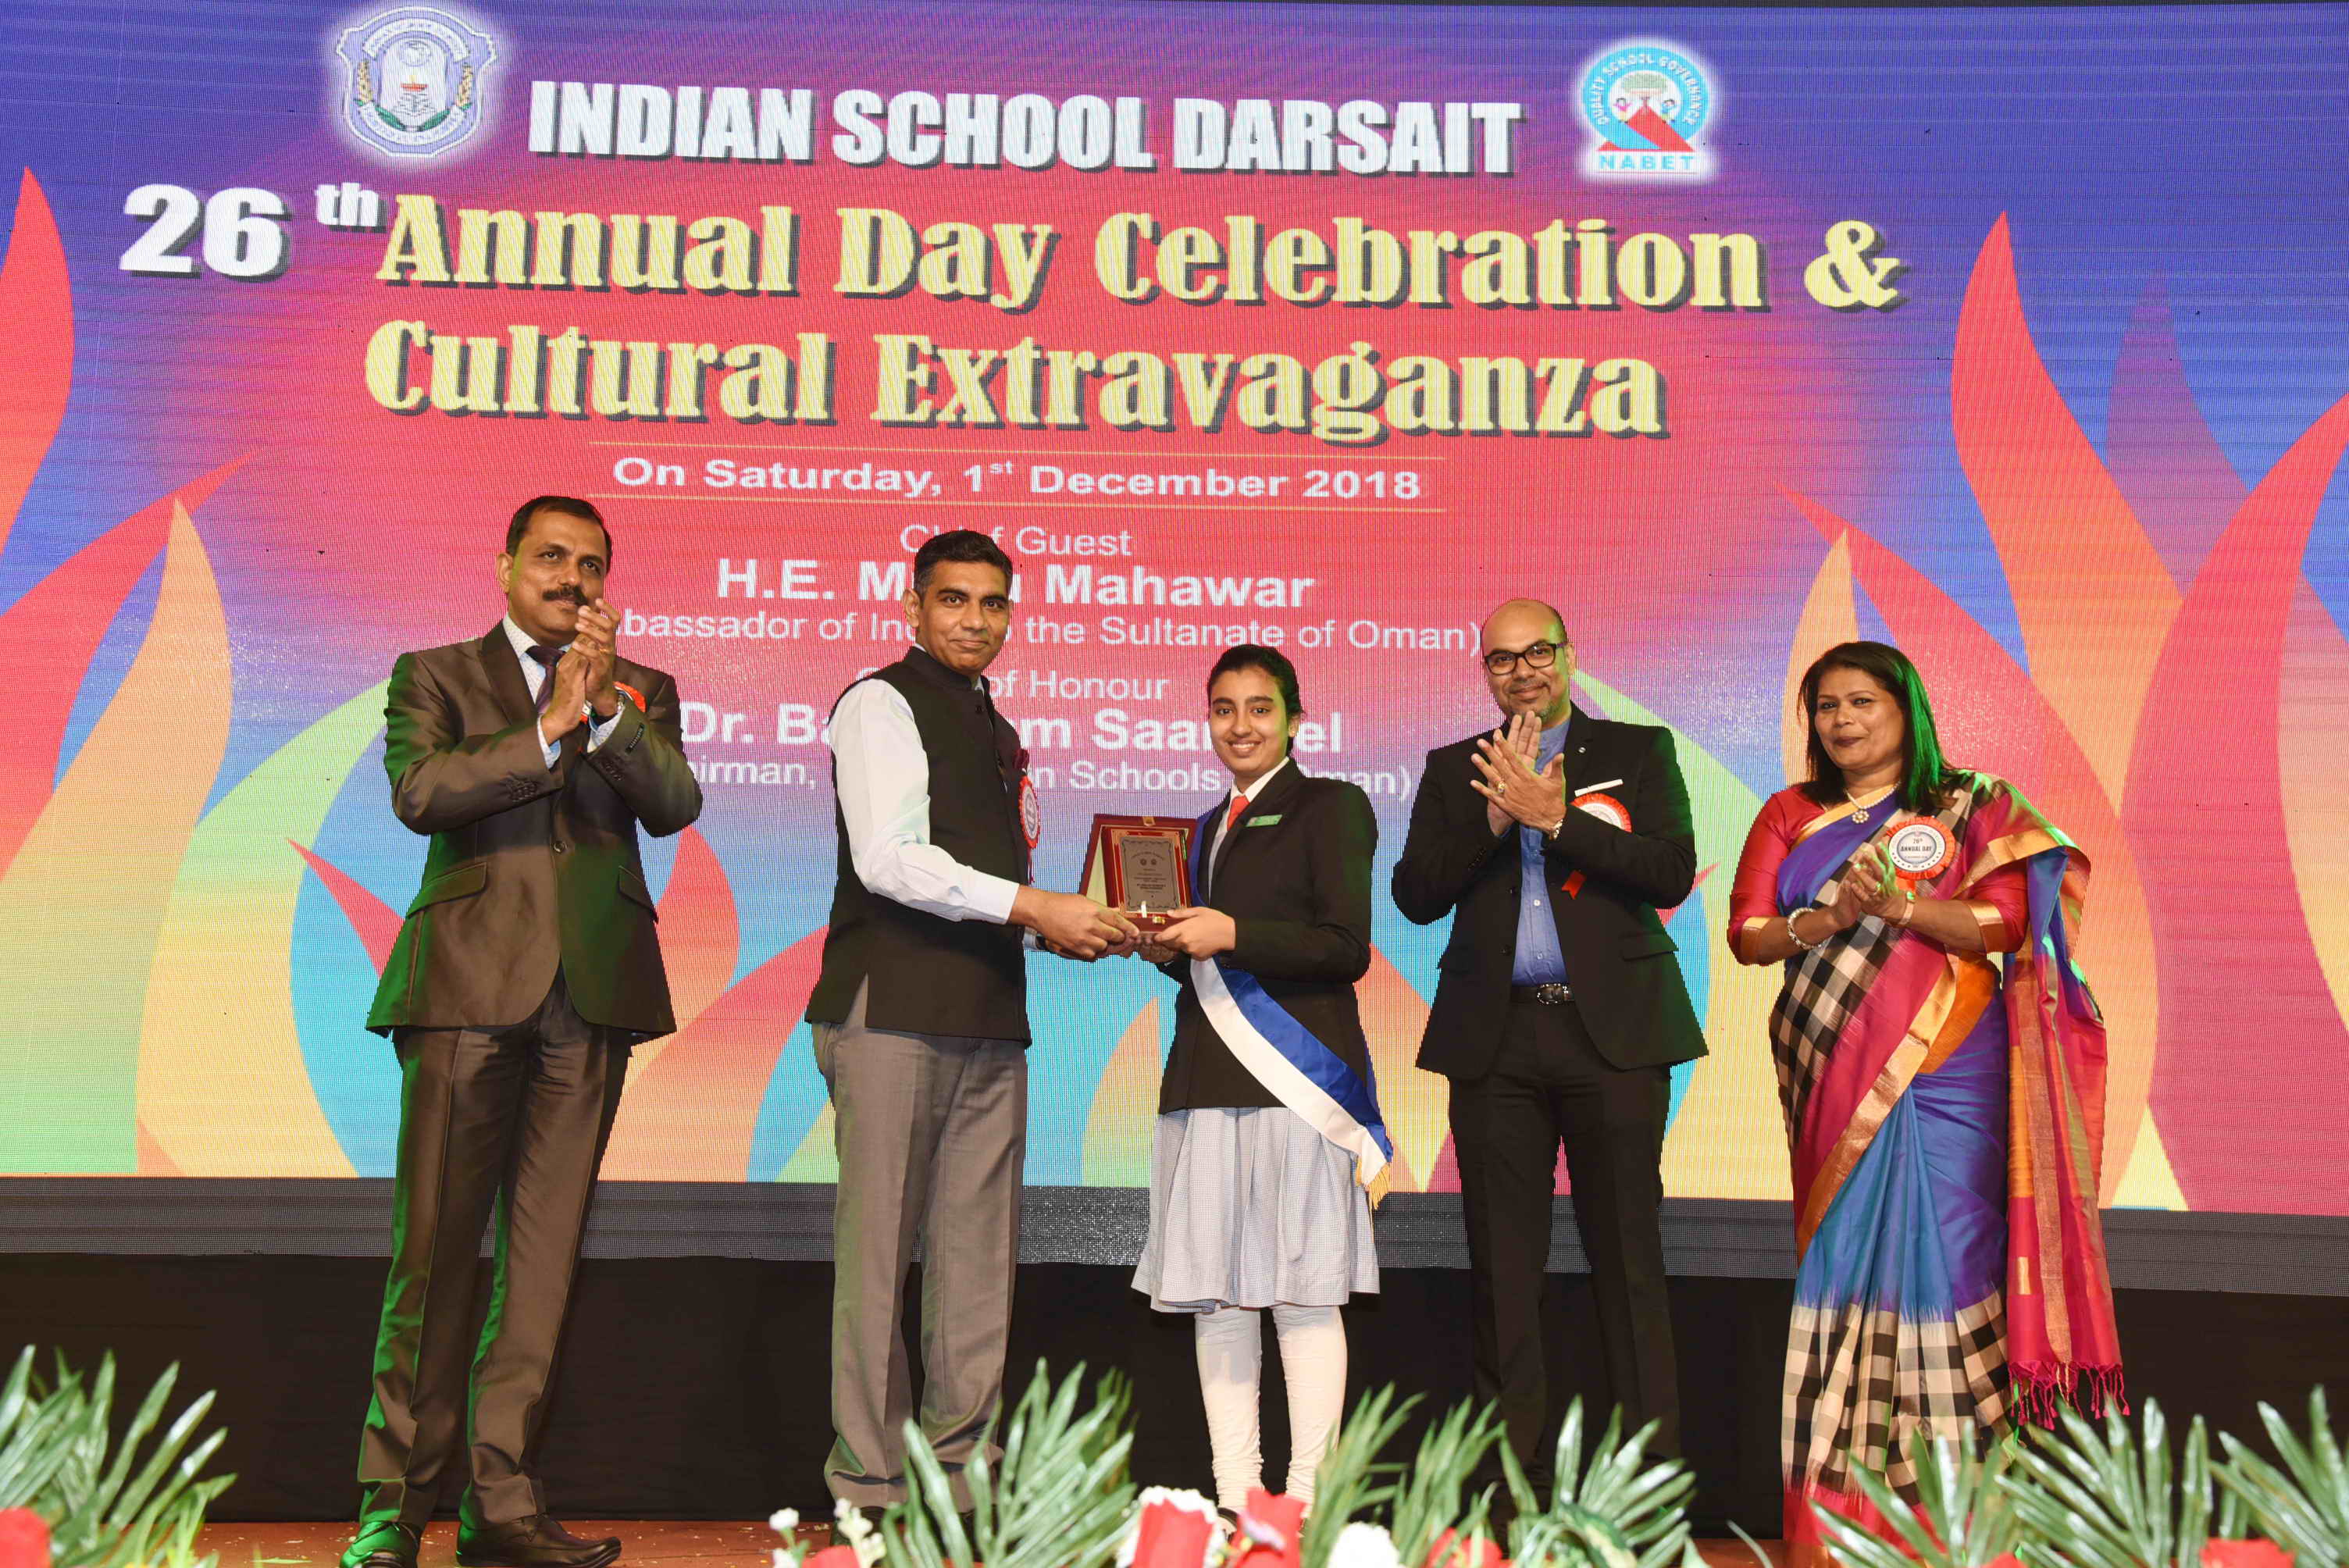 Ambassador was the Chief Guest at the Annual Day of Indian School Darsait, held on Saturday, 1st December 2018.